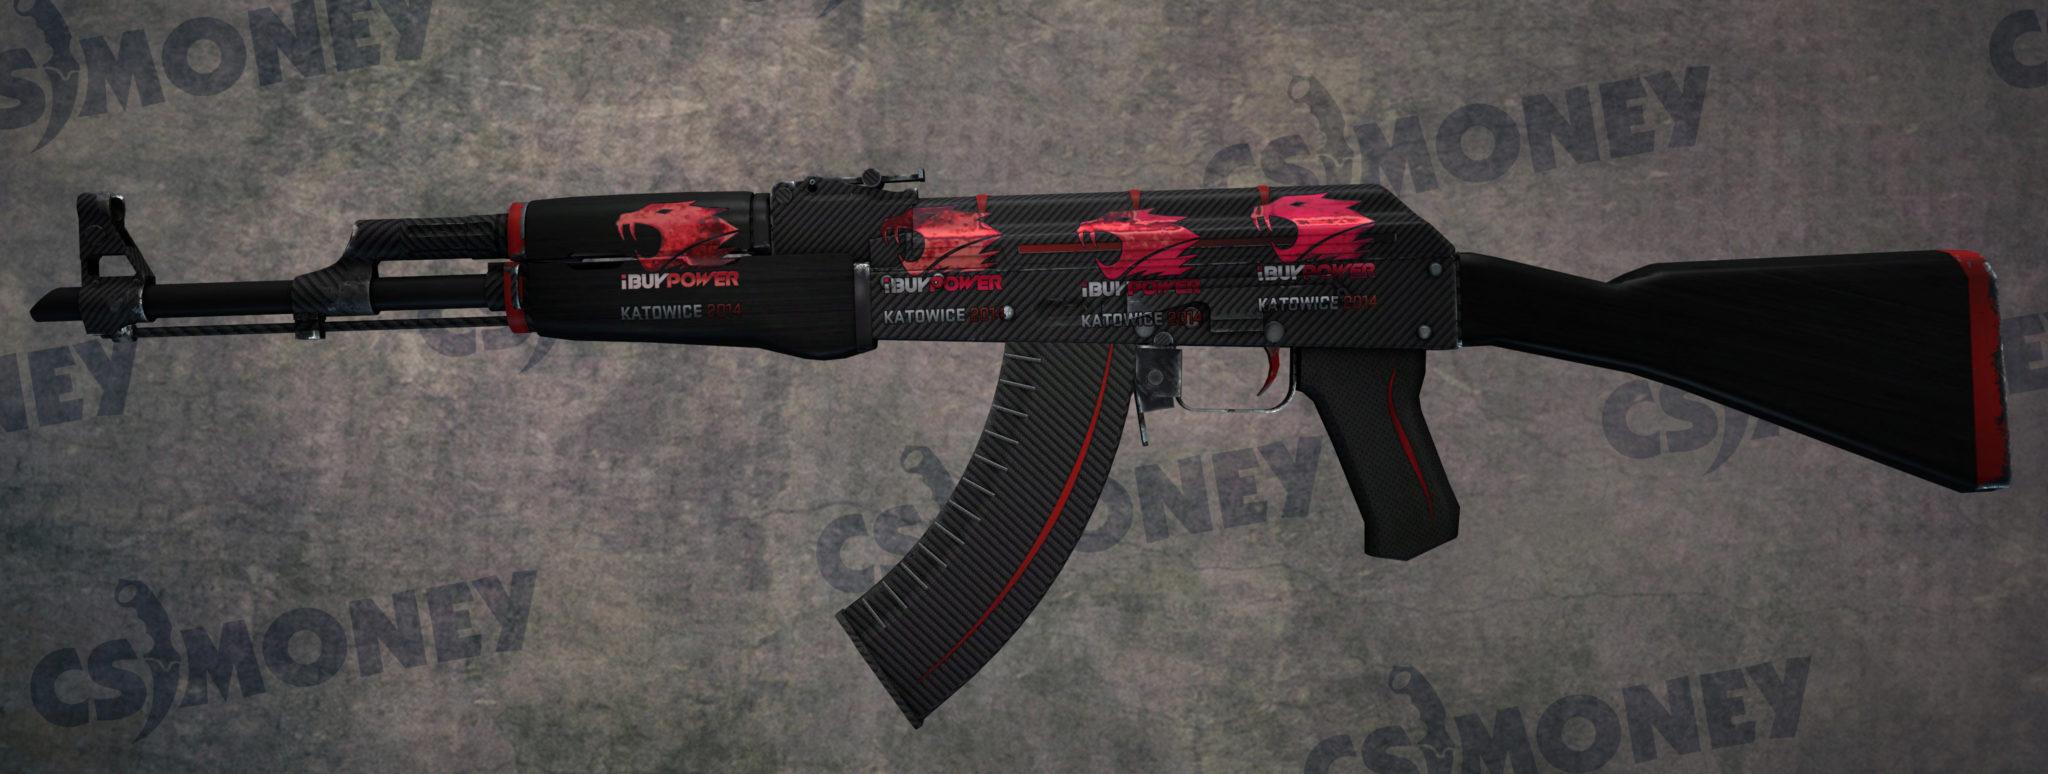 CS:GO Stickers: The Most Expensive One